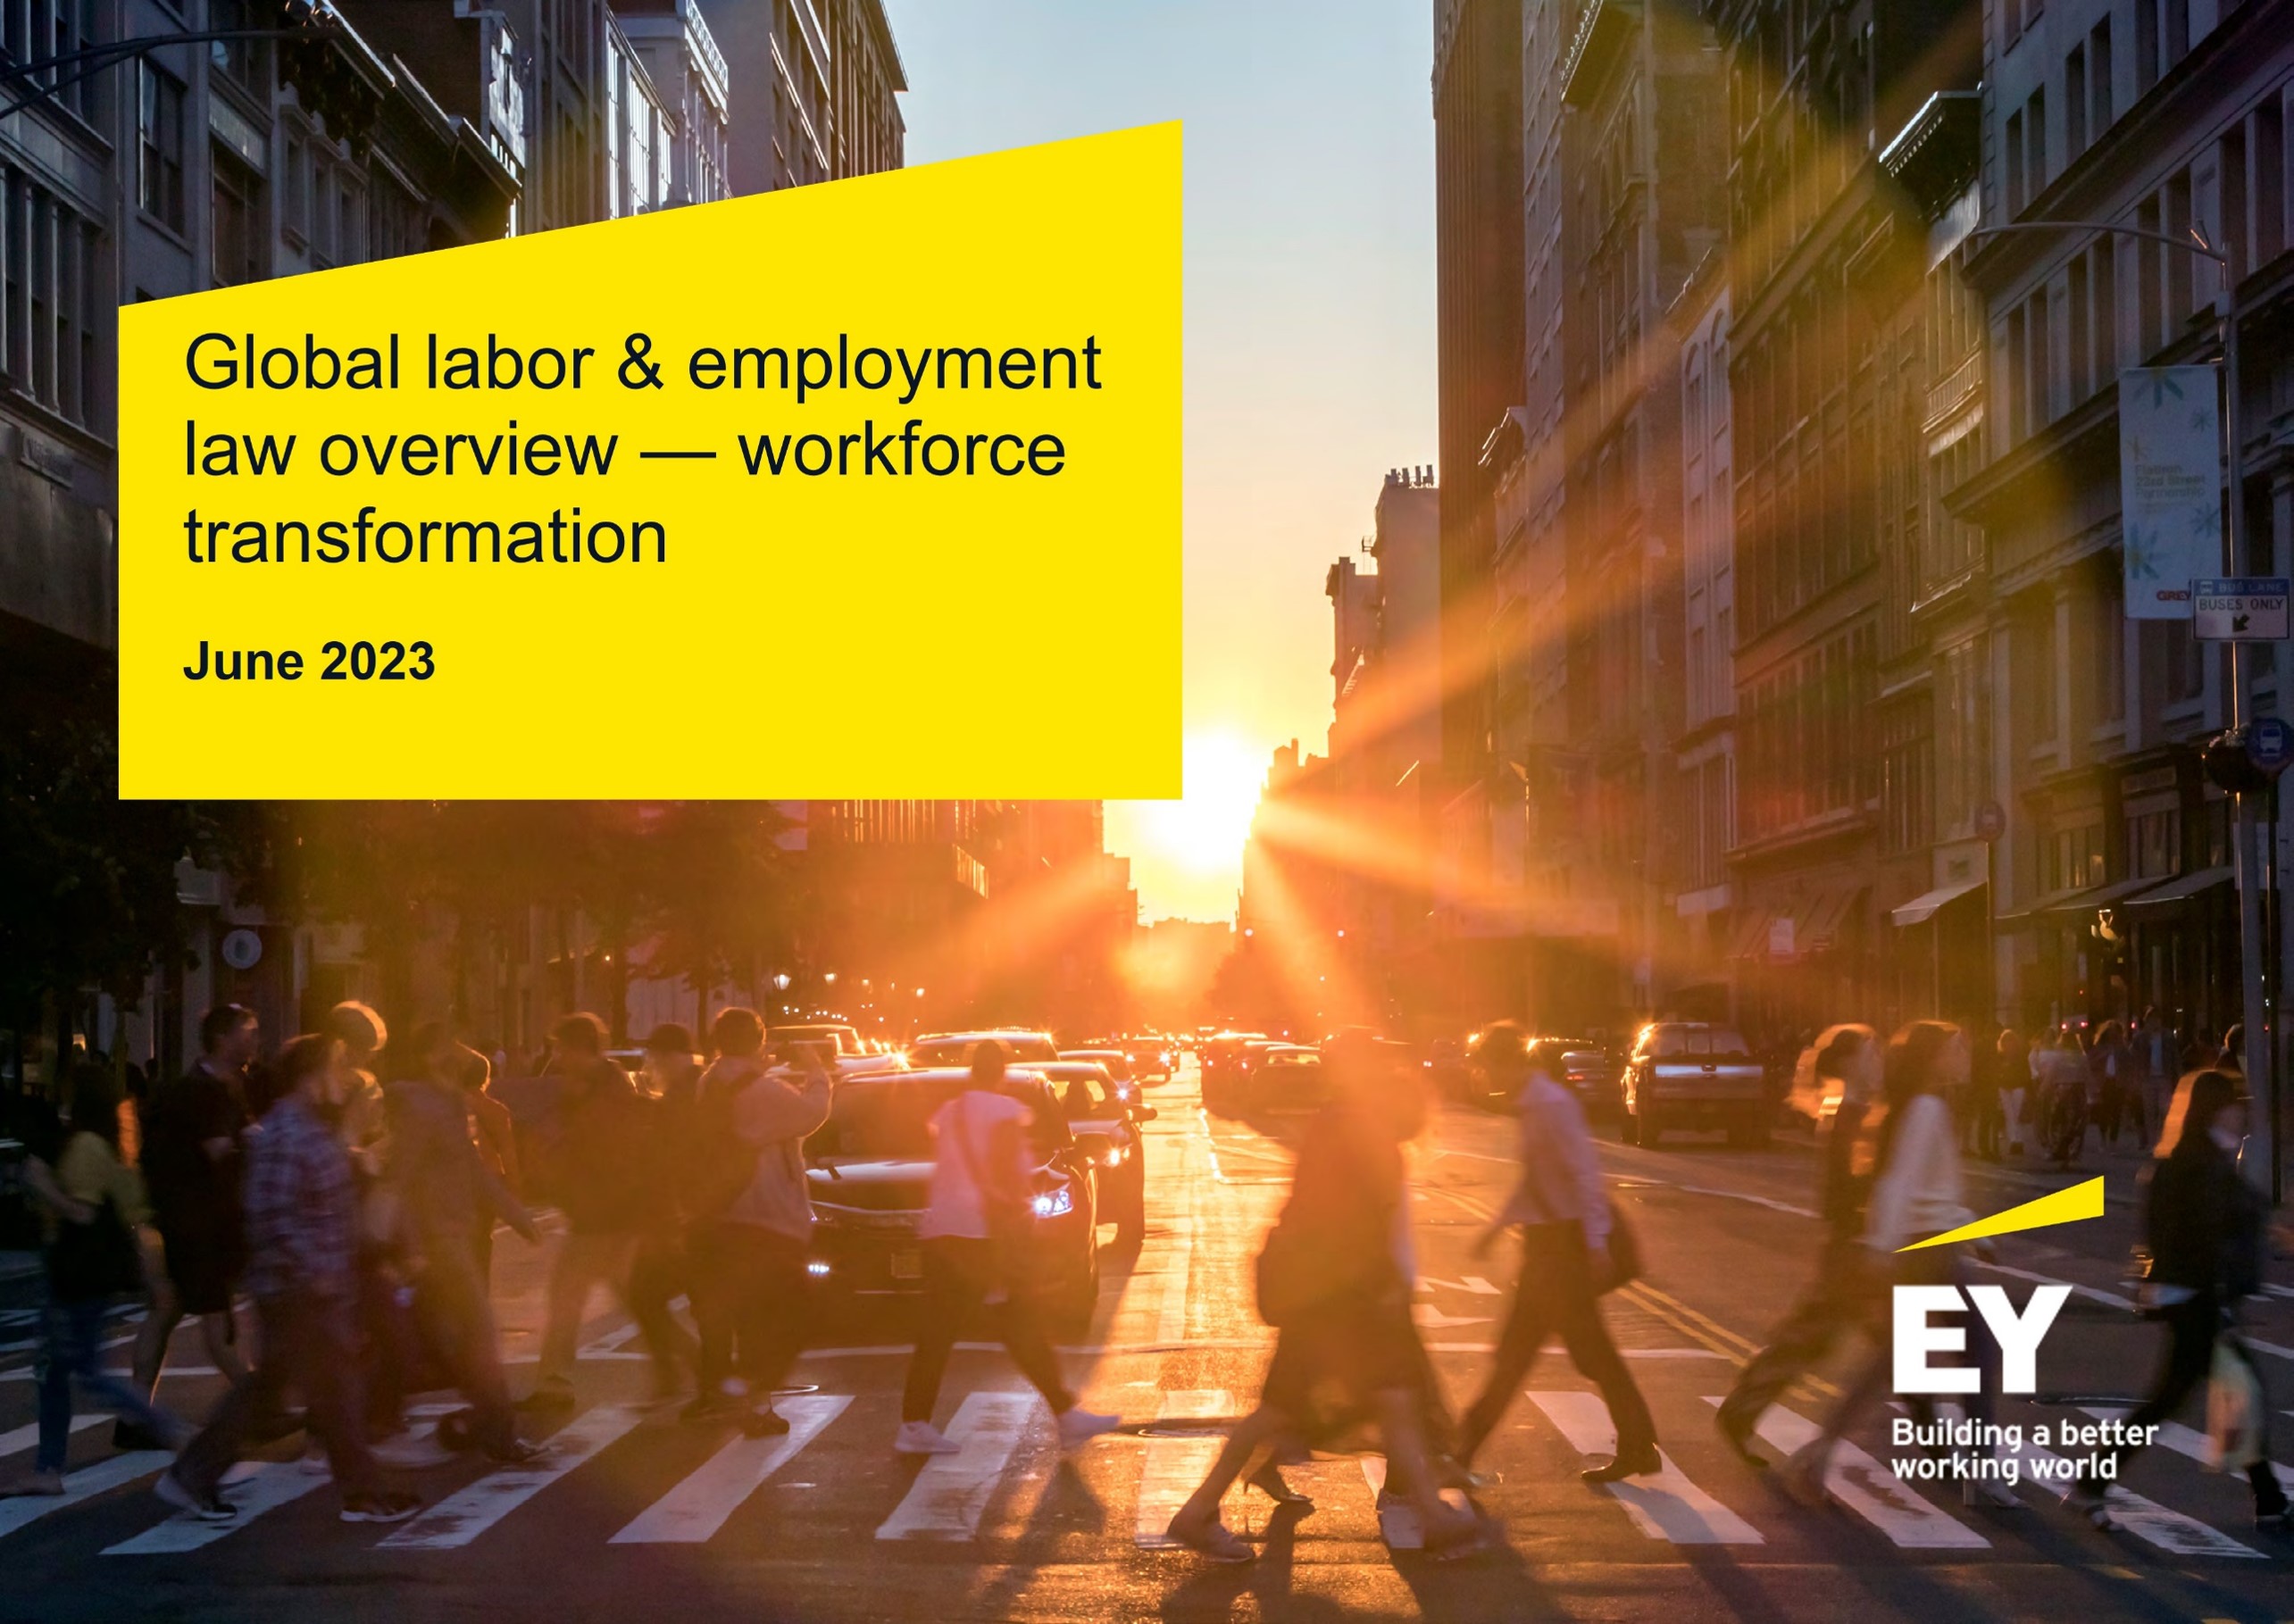 Global Labor & Employment Law Overview - Workforce Transformation, June 2023